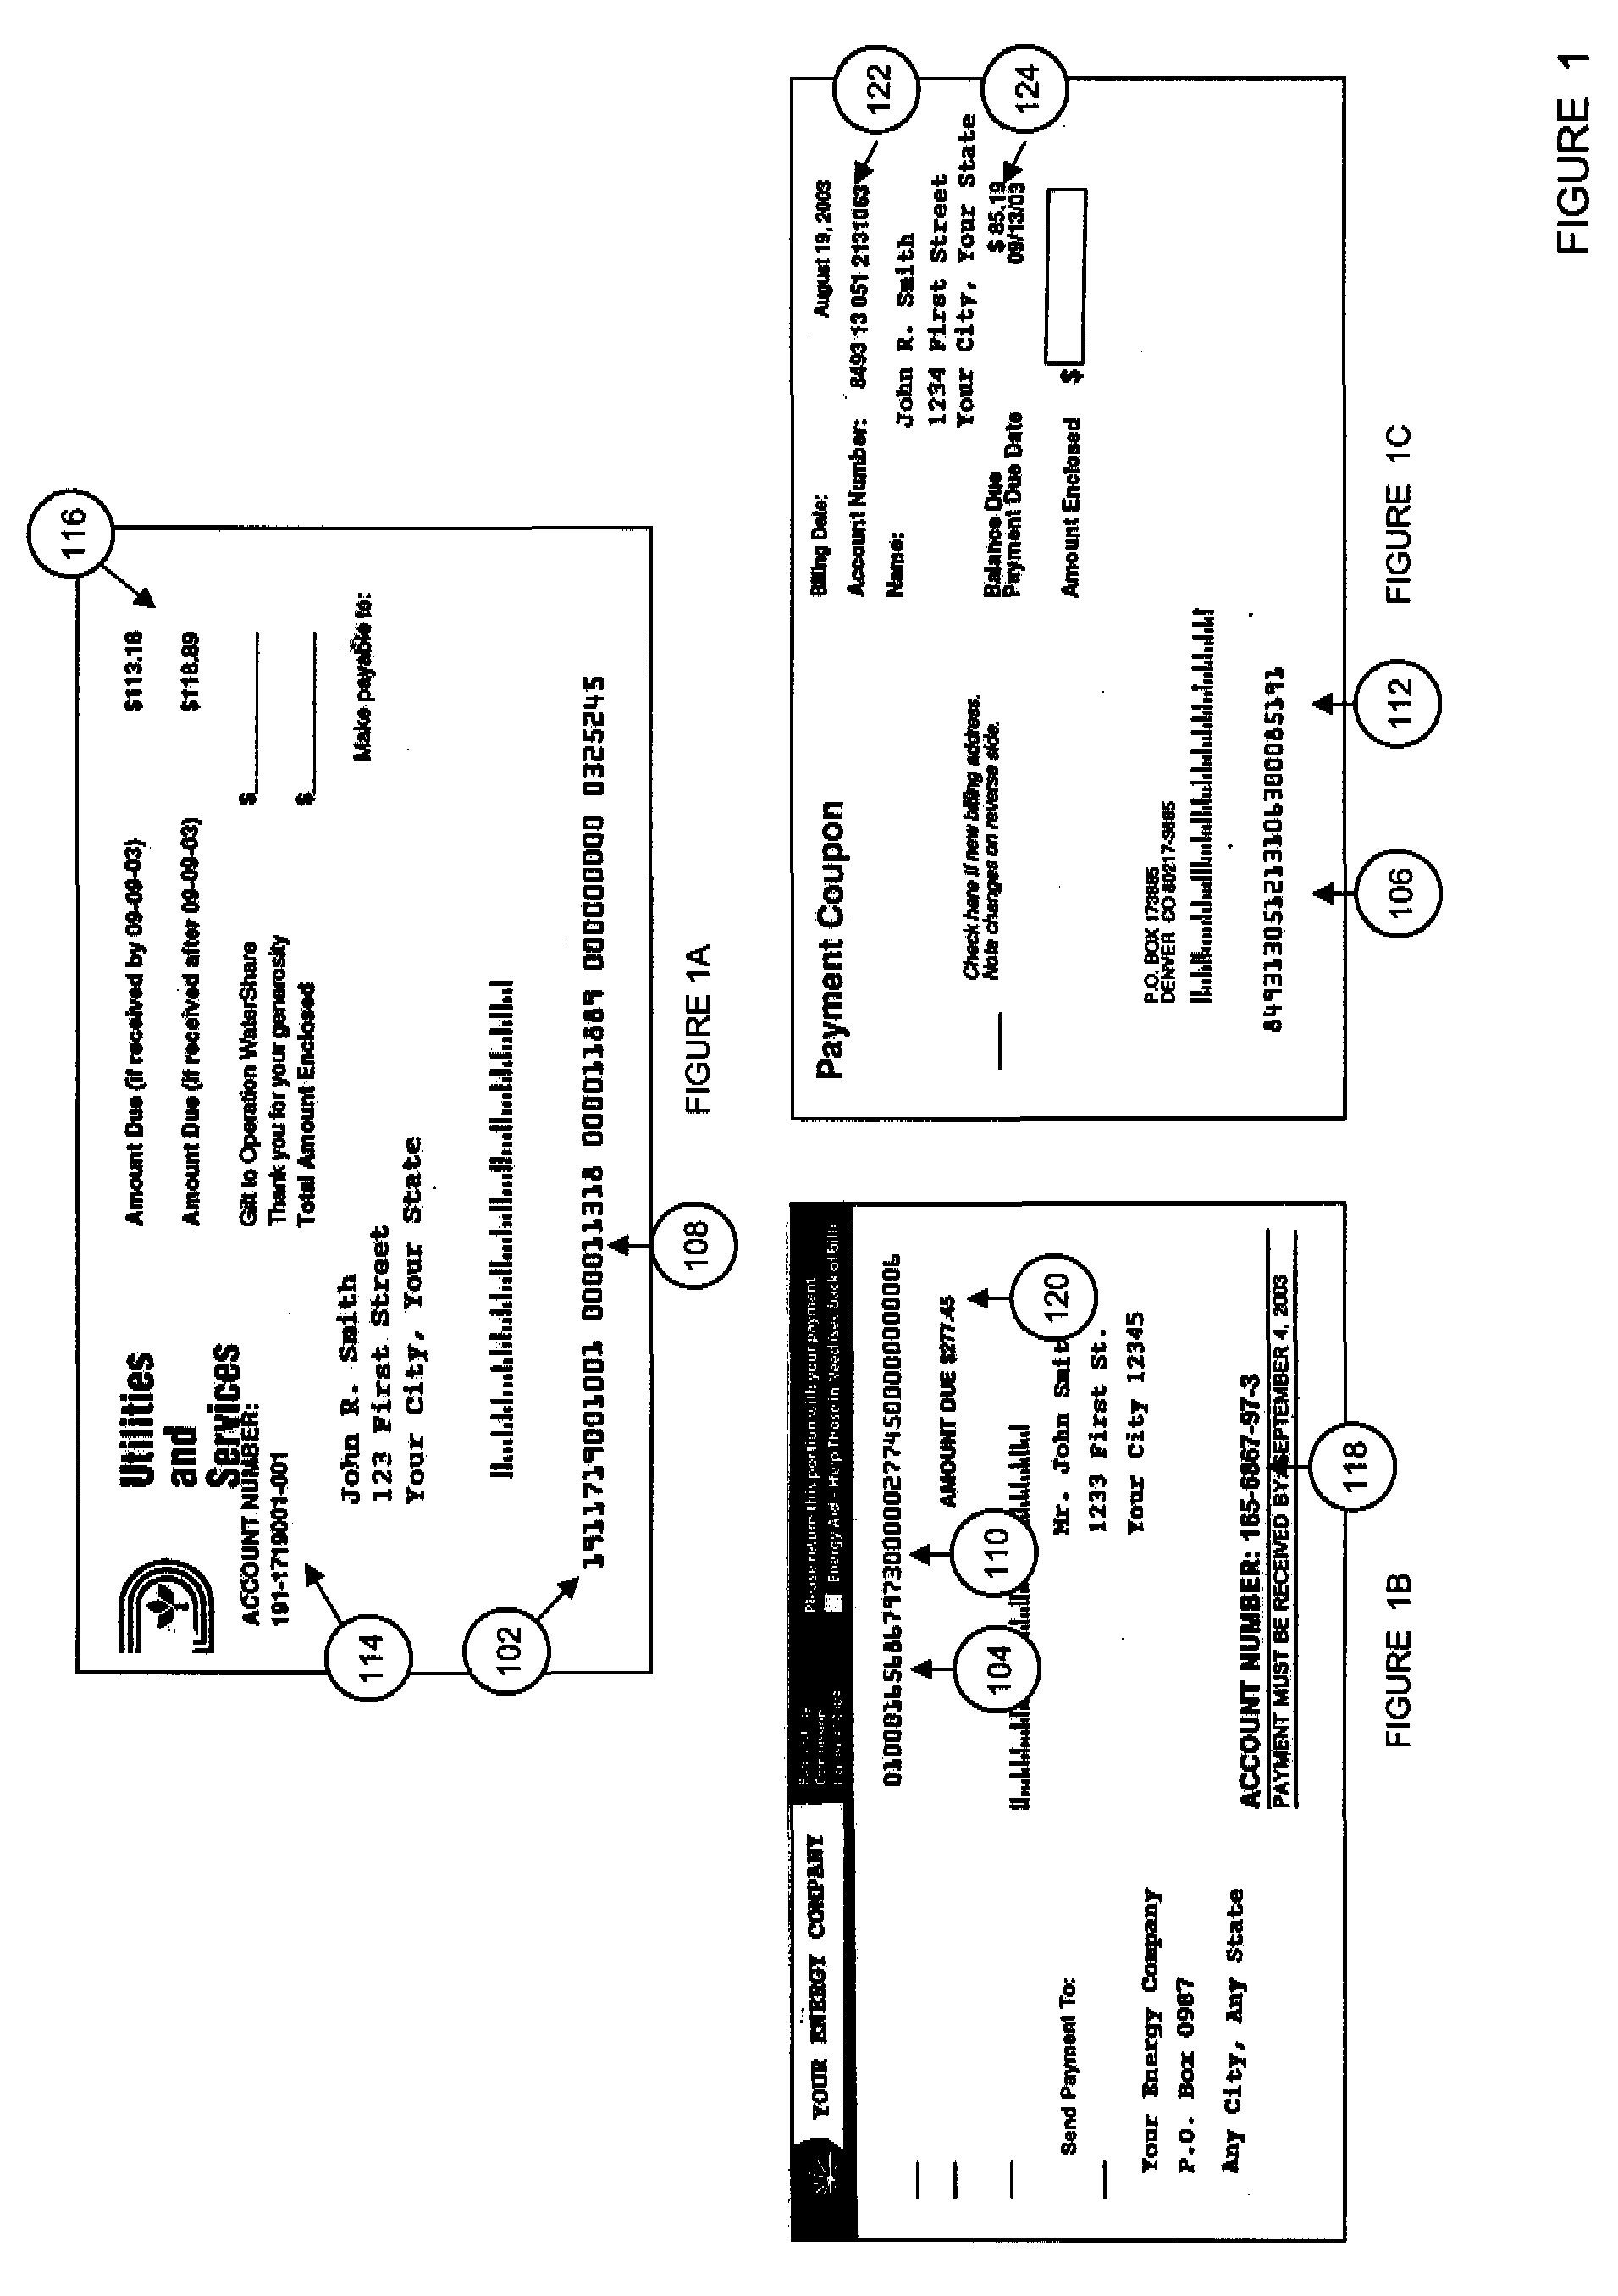 System and Method for Commingled Remittance Payment Processing